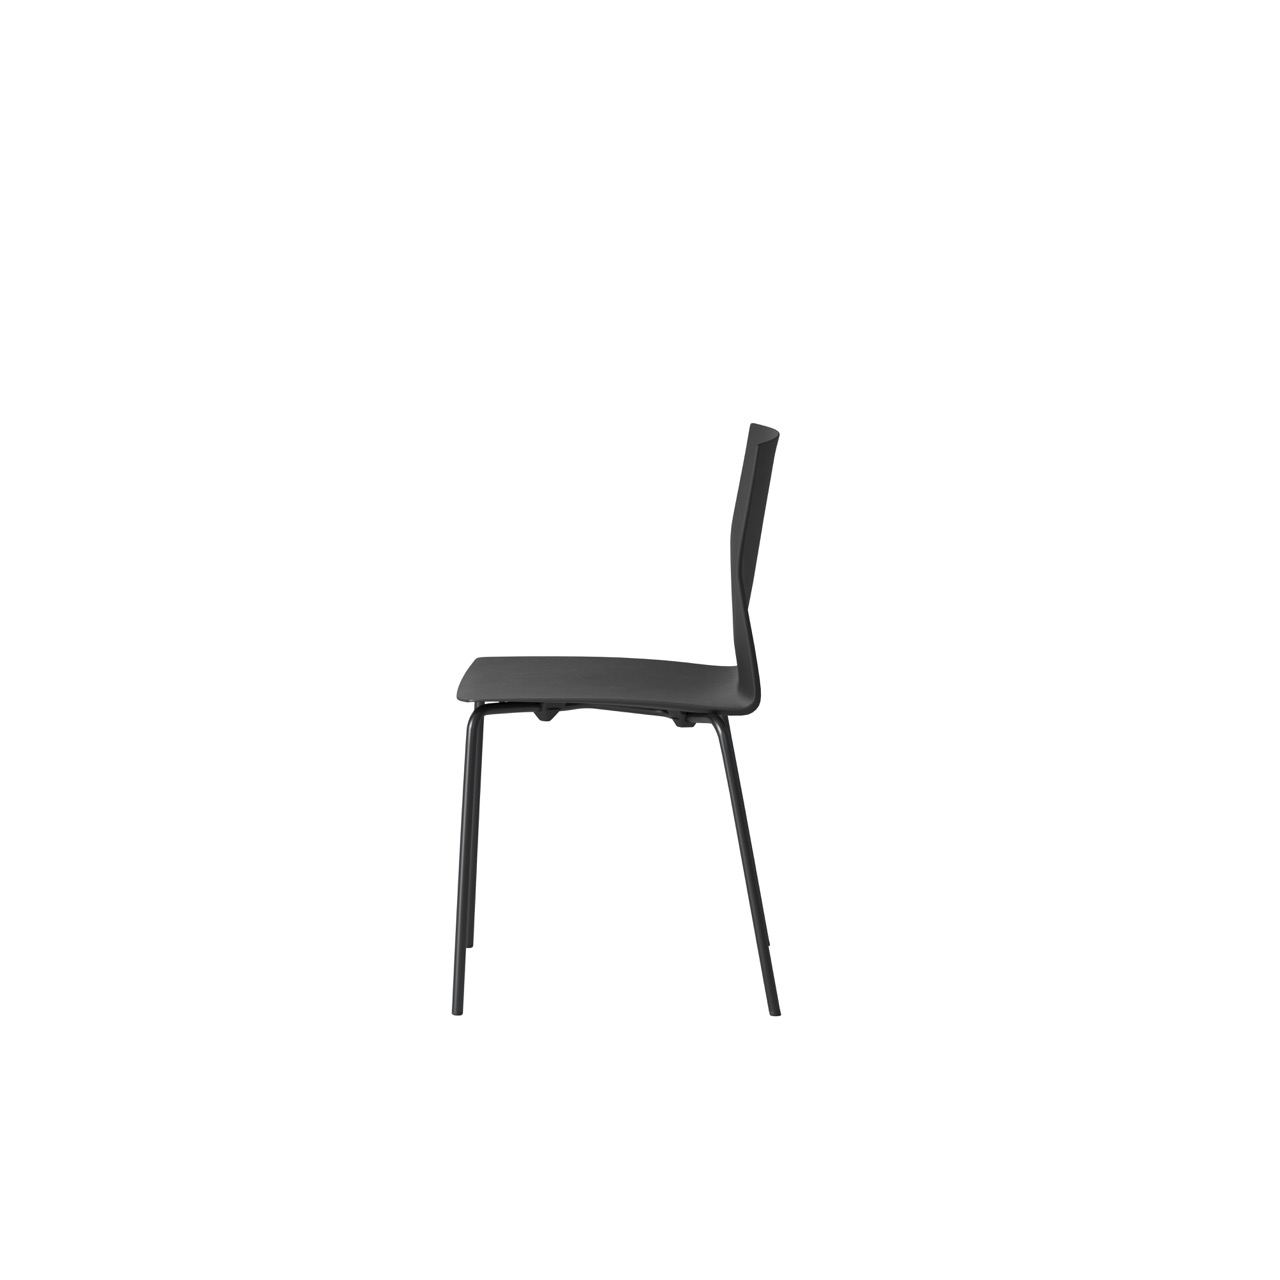 OCEE&FOUR – Chairs – FourCast 2 Four – Packshot Image 2 Large